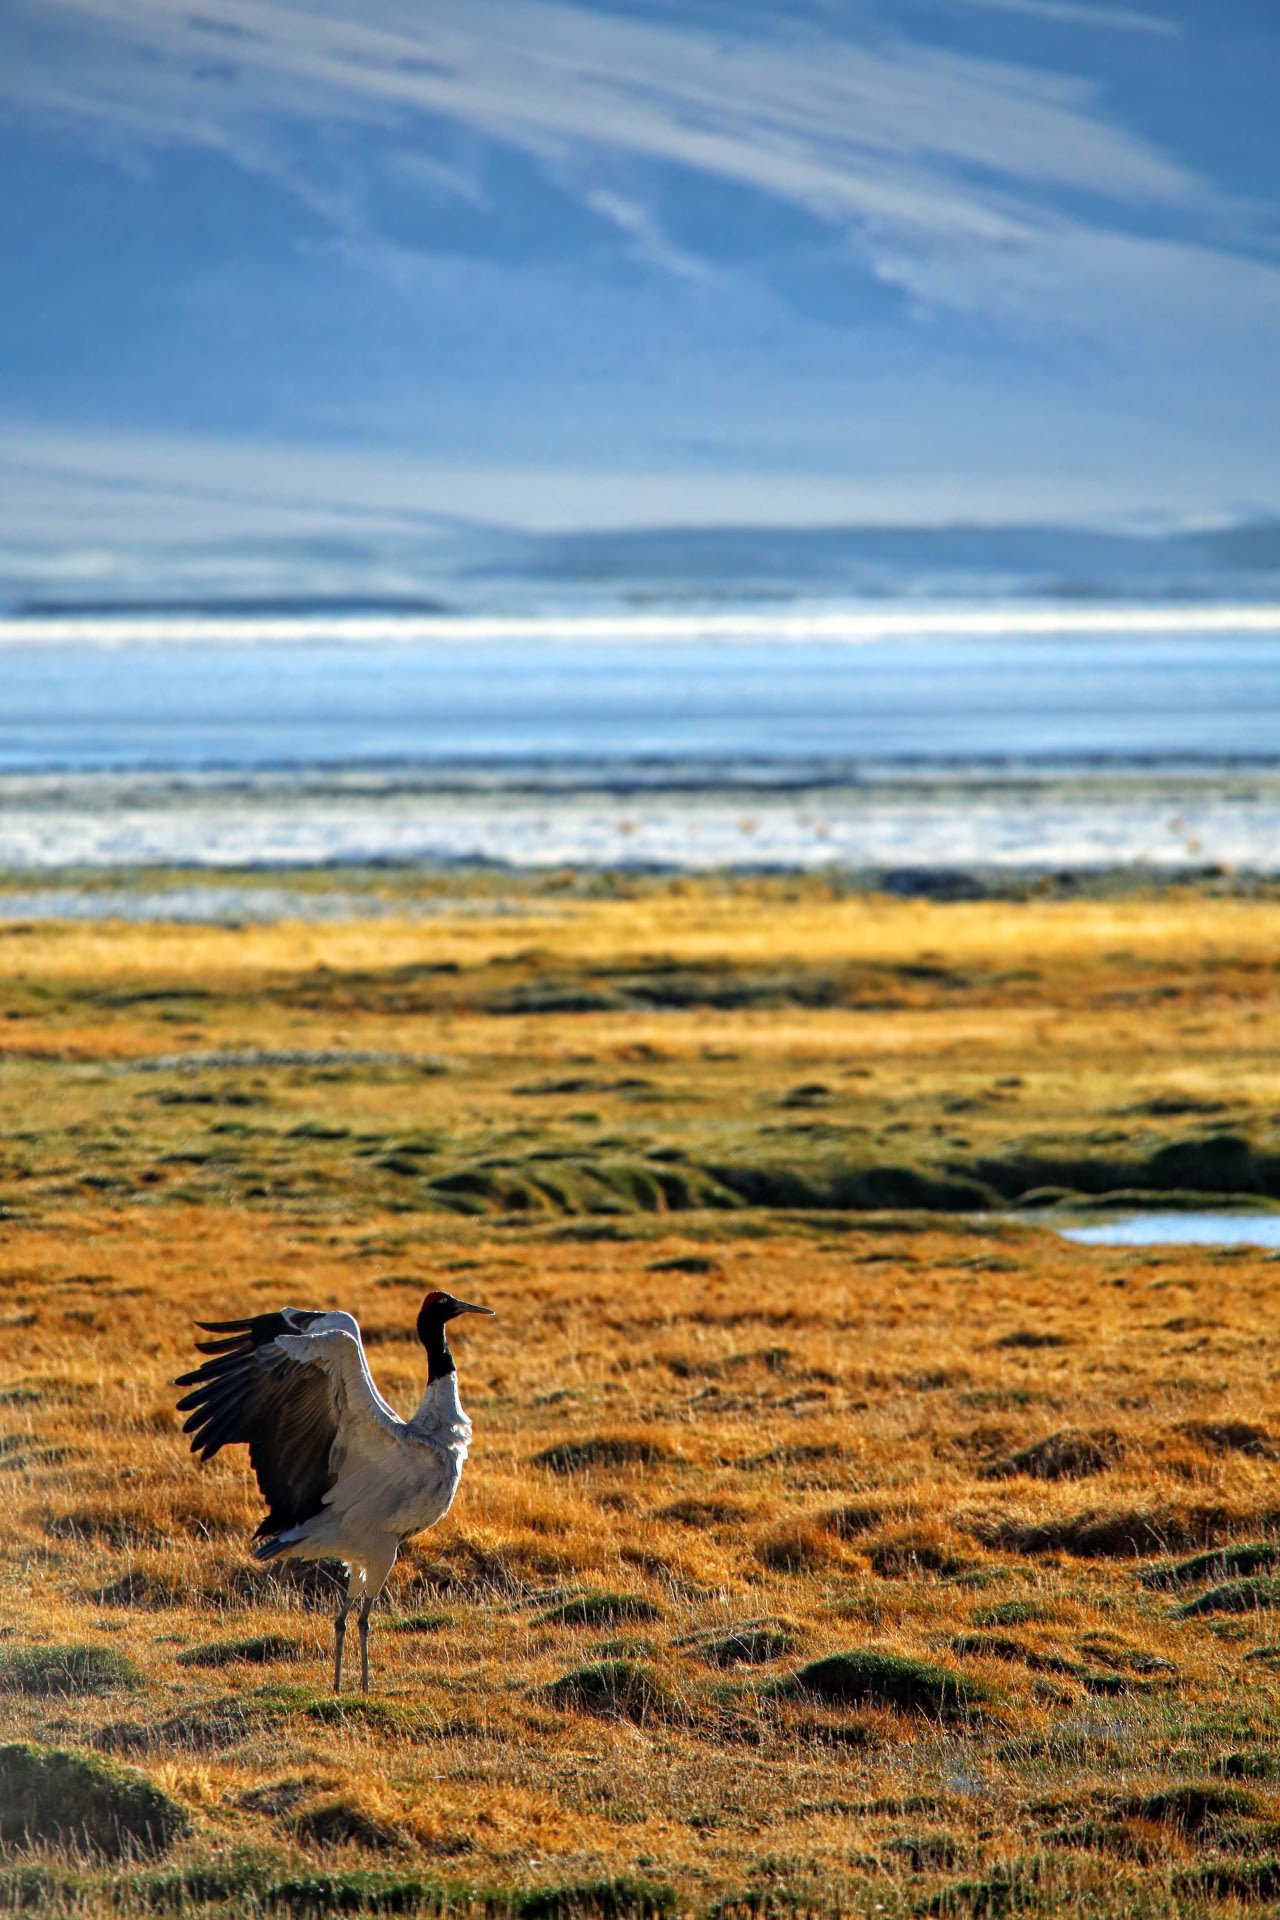 The black-necked crane arrives in Ladakh around end-March or early April to breed. Photo: Surya Ramachandran   Tso Kar, a saltwater lake in Ladakh at an altitude of 4,582 m, is a known breeding ground for the black-necked crane. In fact, the Tso Kar basin is where the cranes were first discovered in India in 1919. Photo: Shivang Mehta